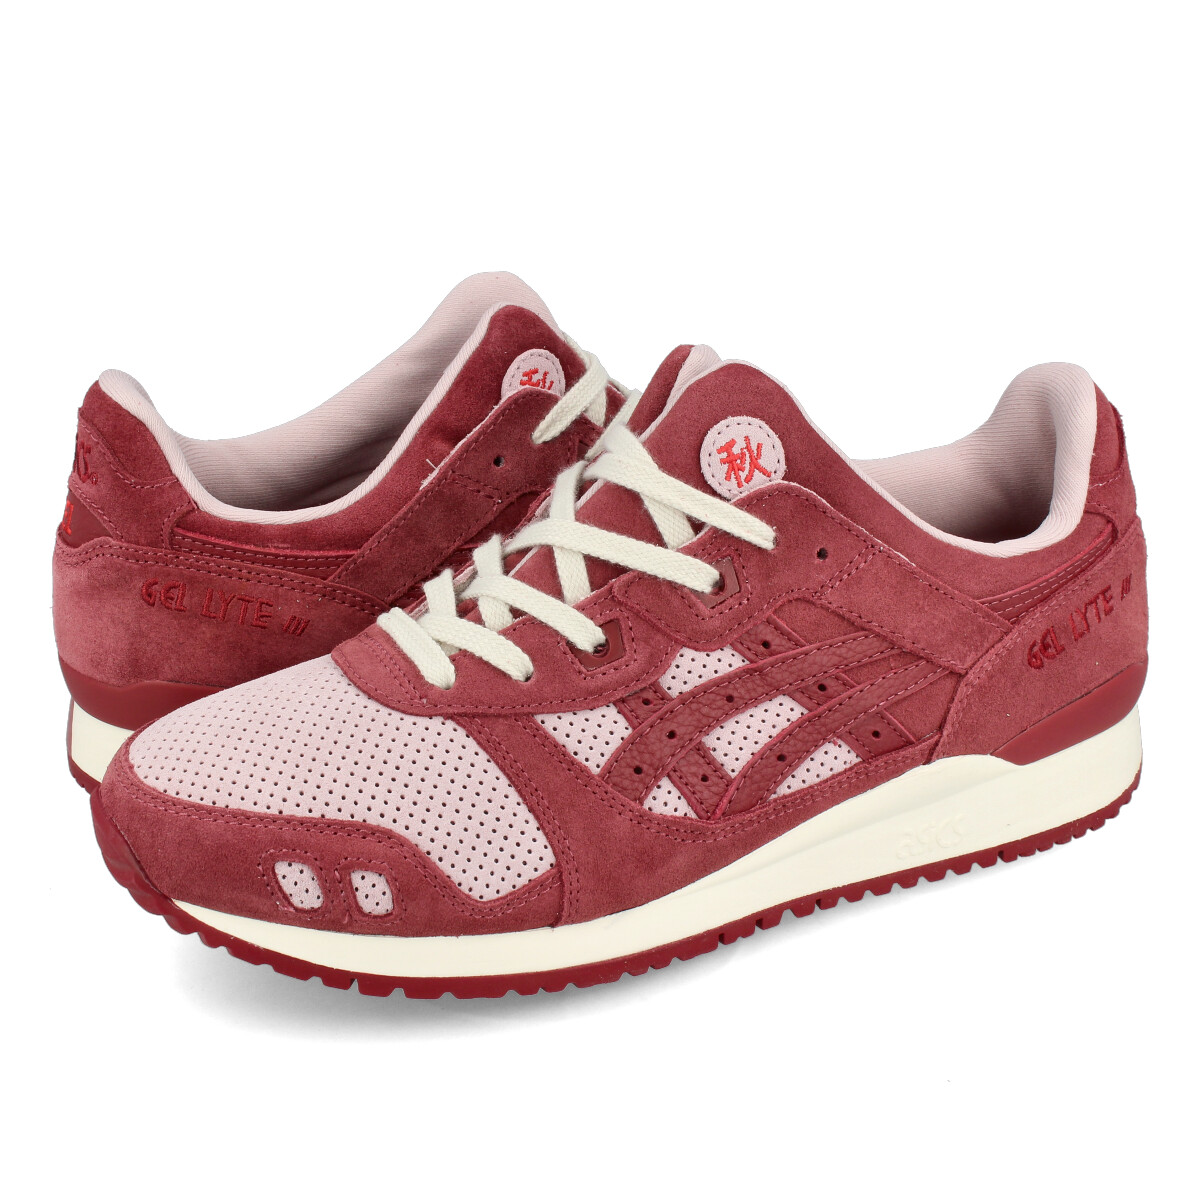 ASICS SPORTSTYLE GEL-LYTE III OG アシックス スポーツスタイル ゲルライト 3 オージー WATERSHED  ROSE/BEET RED 1201A296.700 | SELECT SHOP LOWTEX